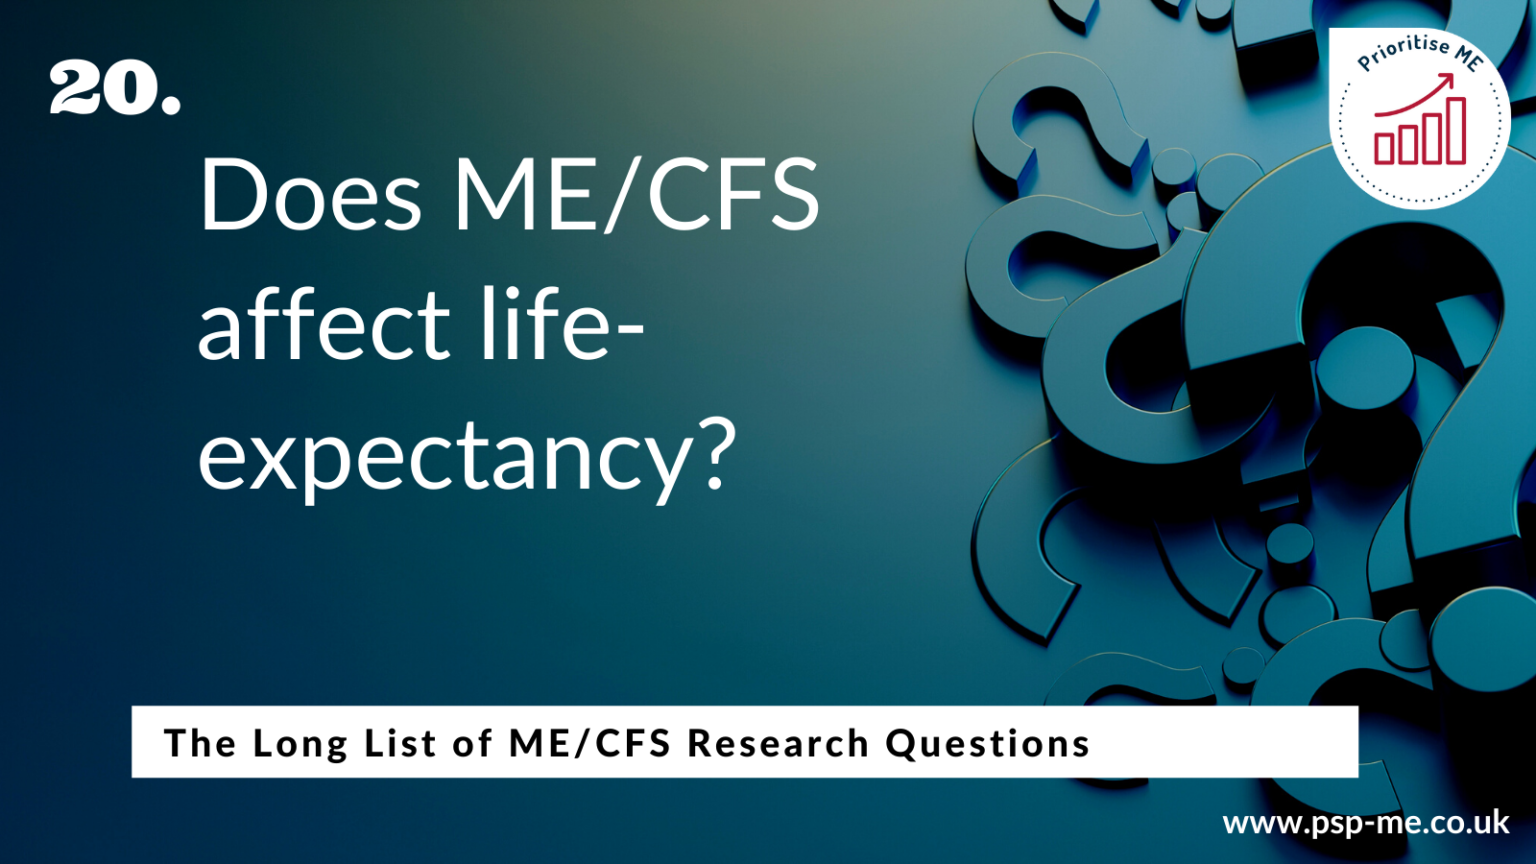 The Long List of ME_CFS Research Questions (20)